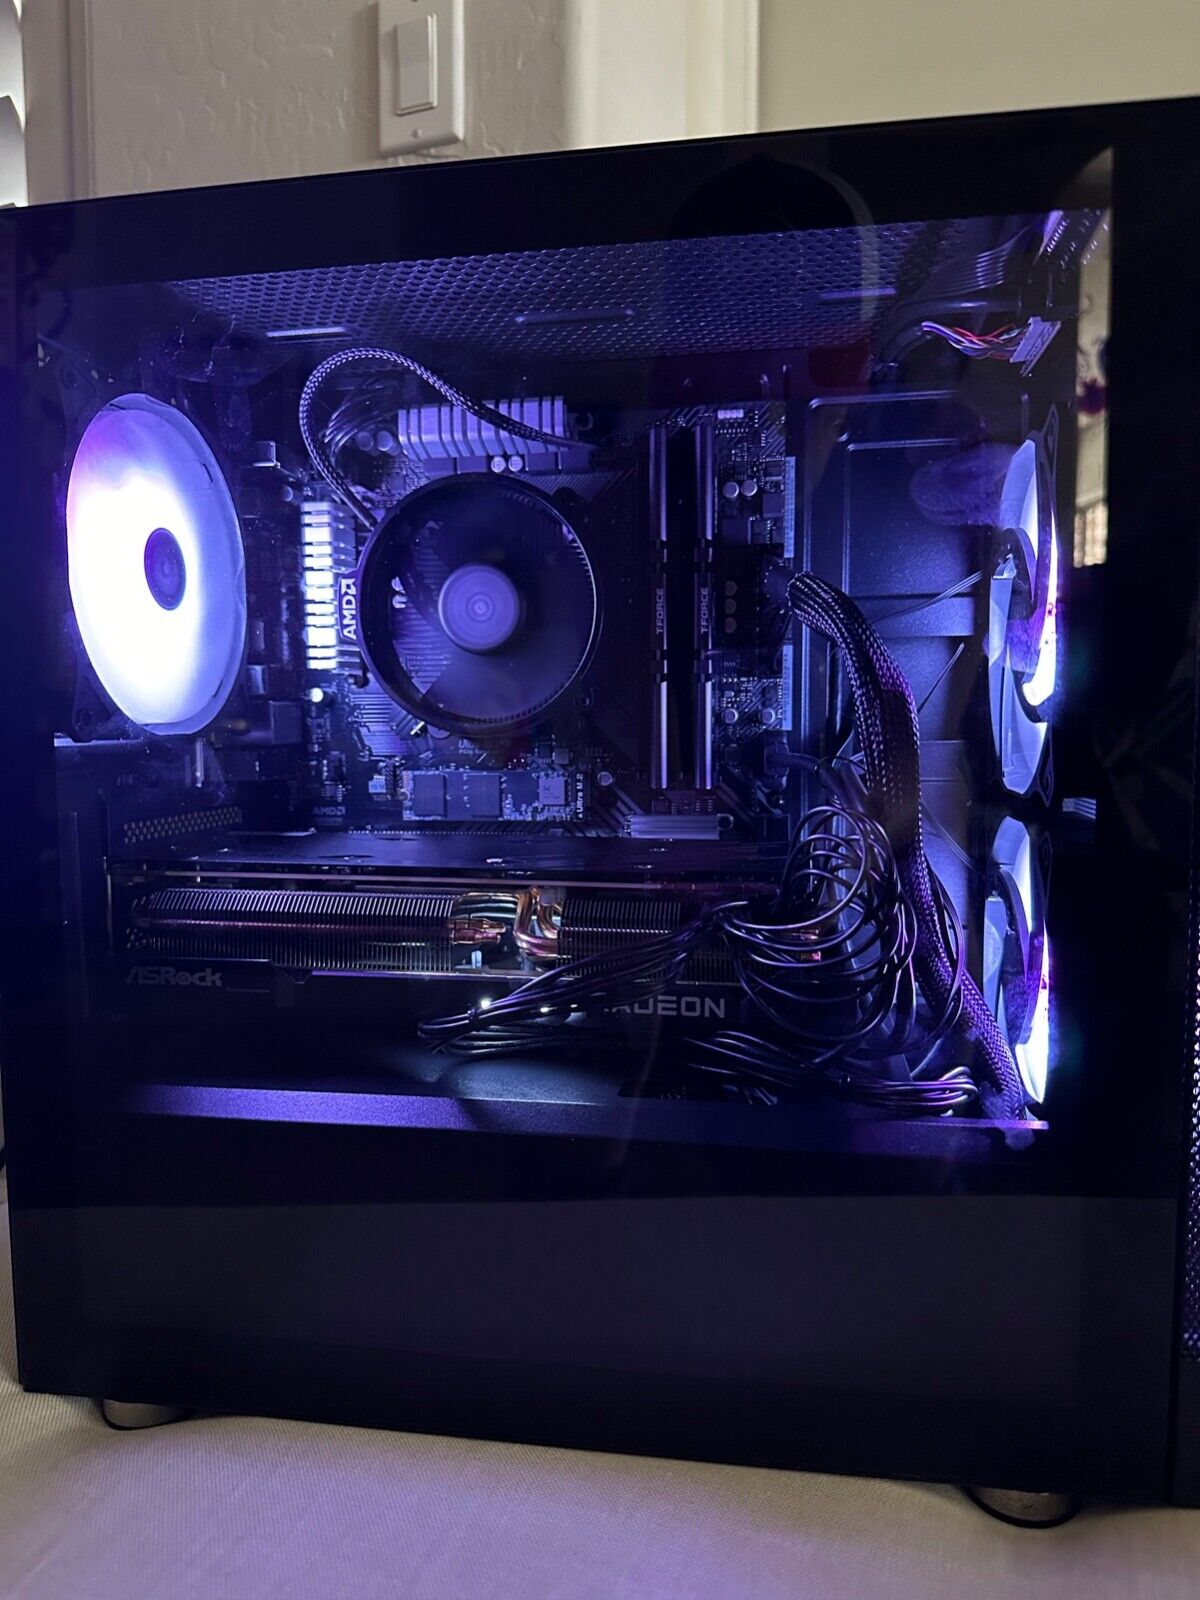 BRAND NEW Pure Performance Gaming PC* See Specs in Description*